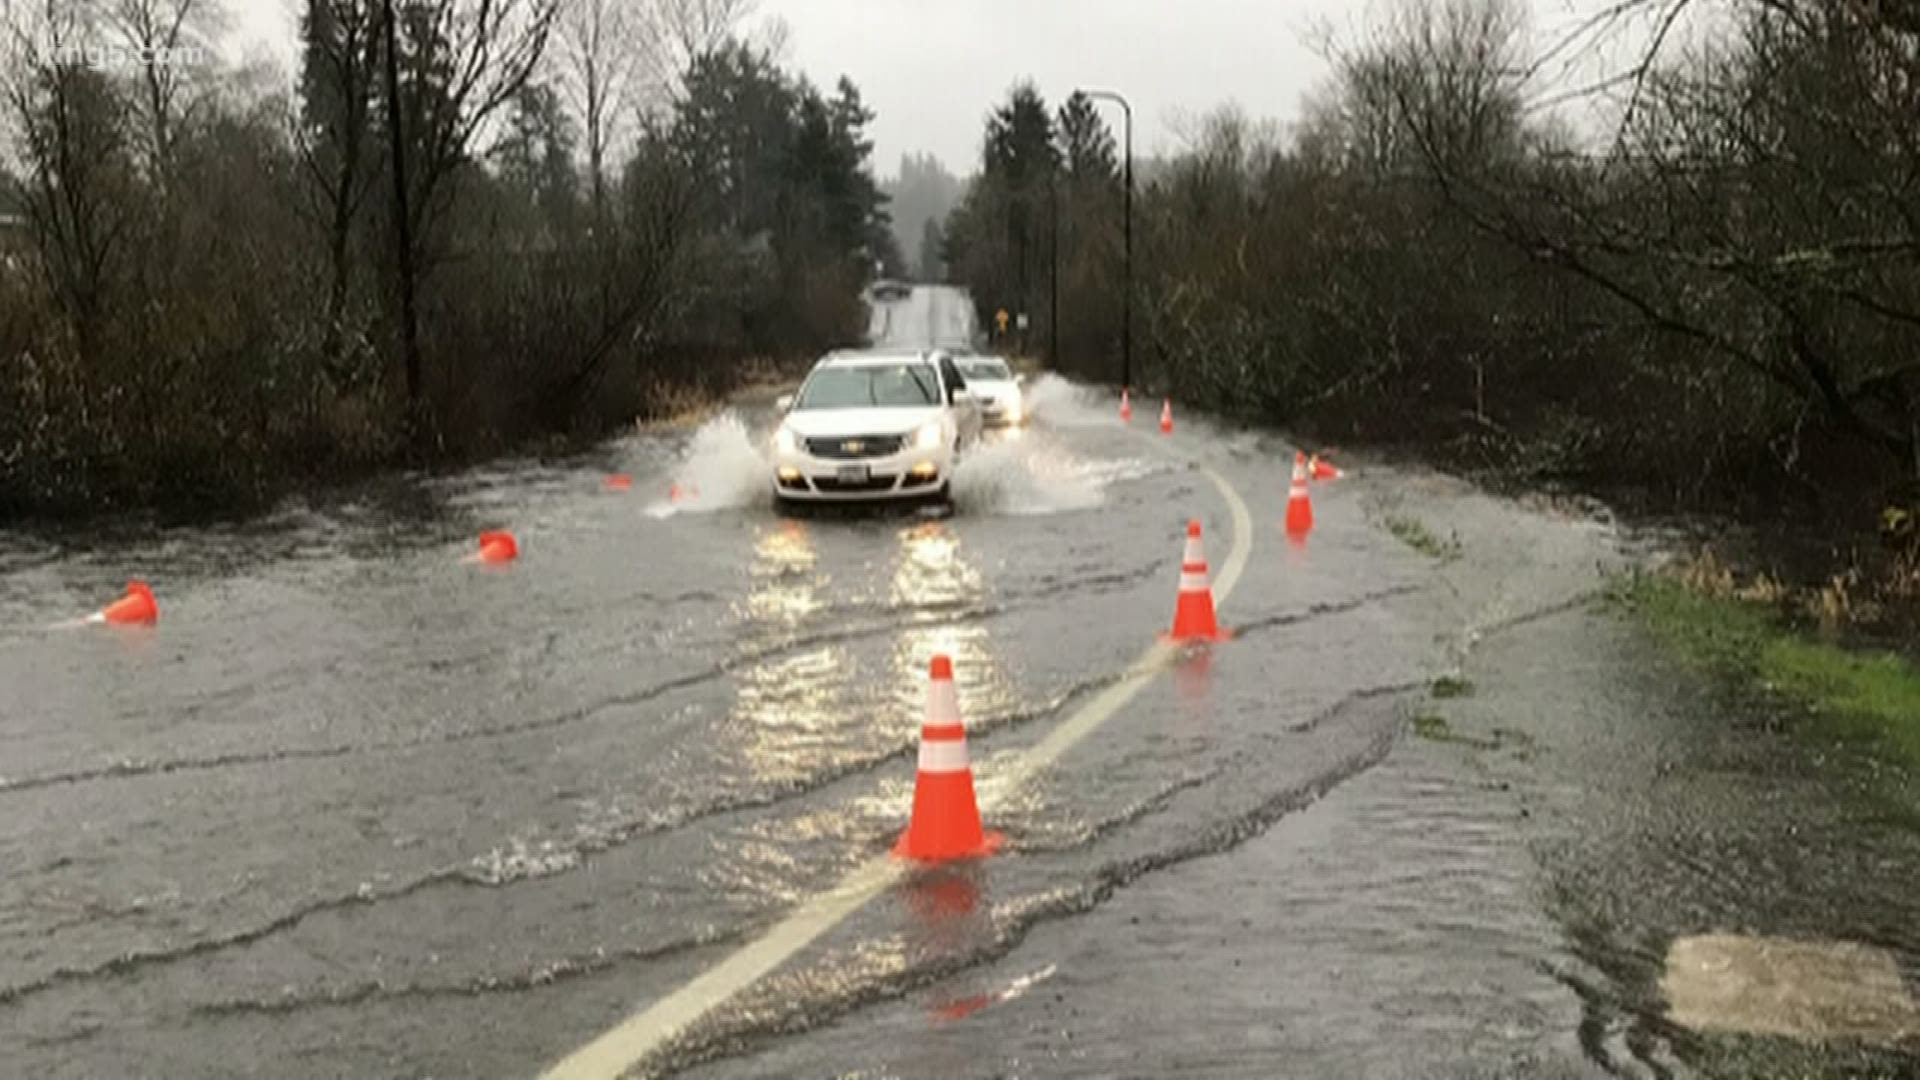 Several counties are under flood warnings. Roads in western Washington have closed due to high flood waters and a landslide stopped traffic in Renton.